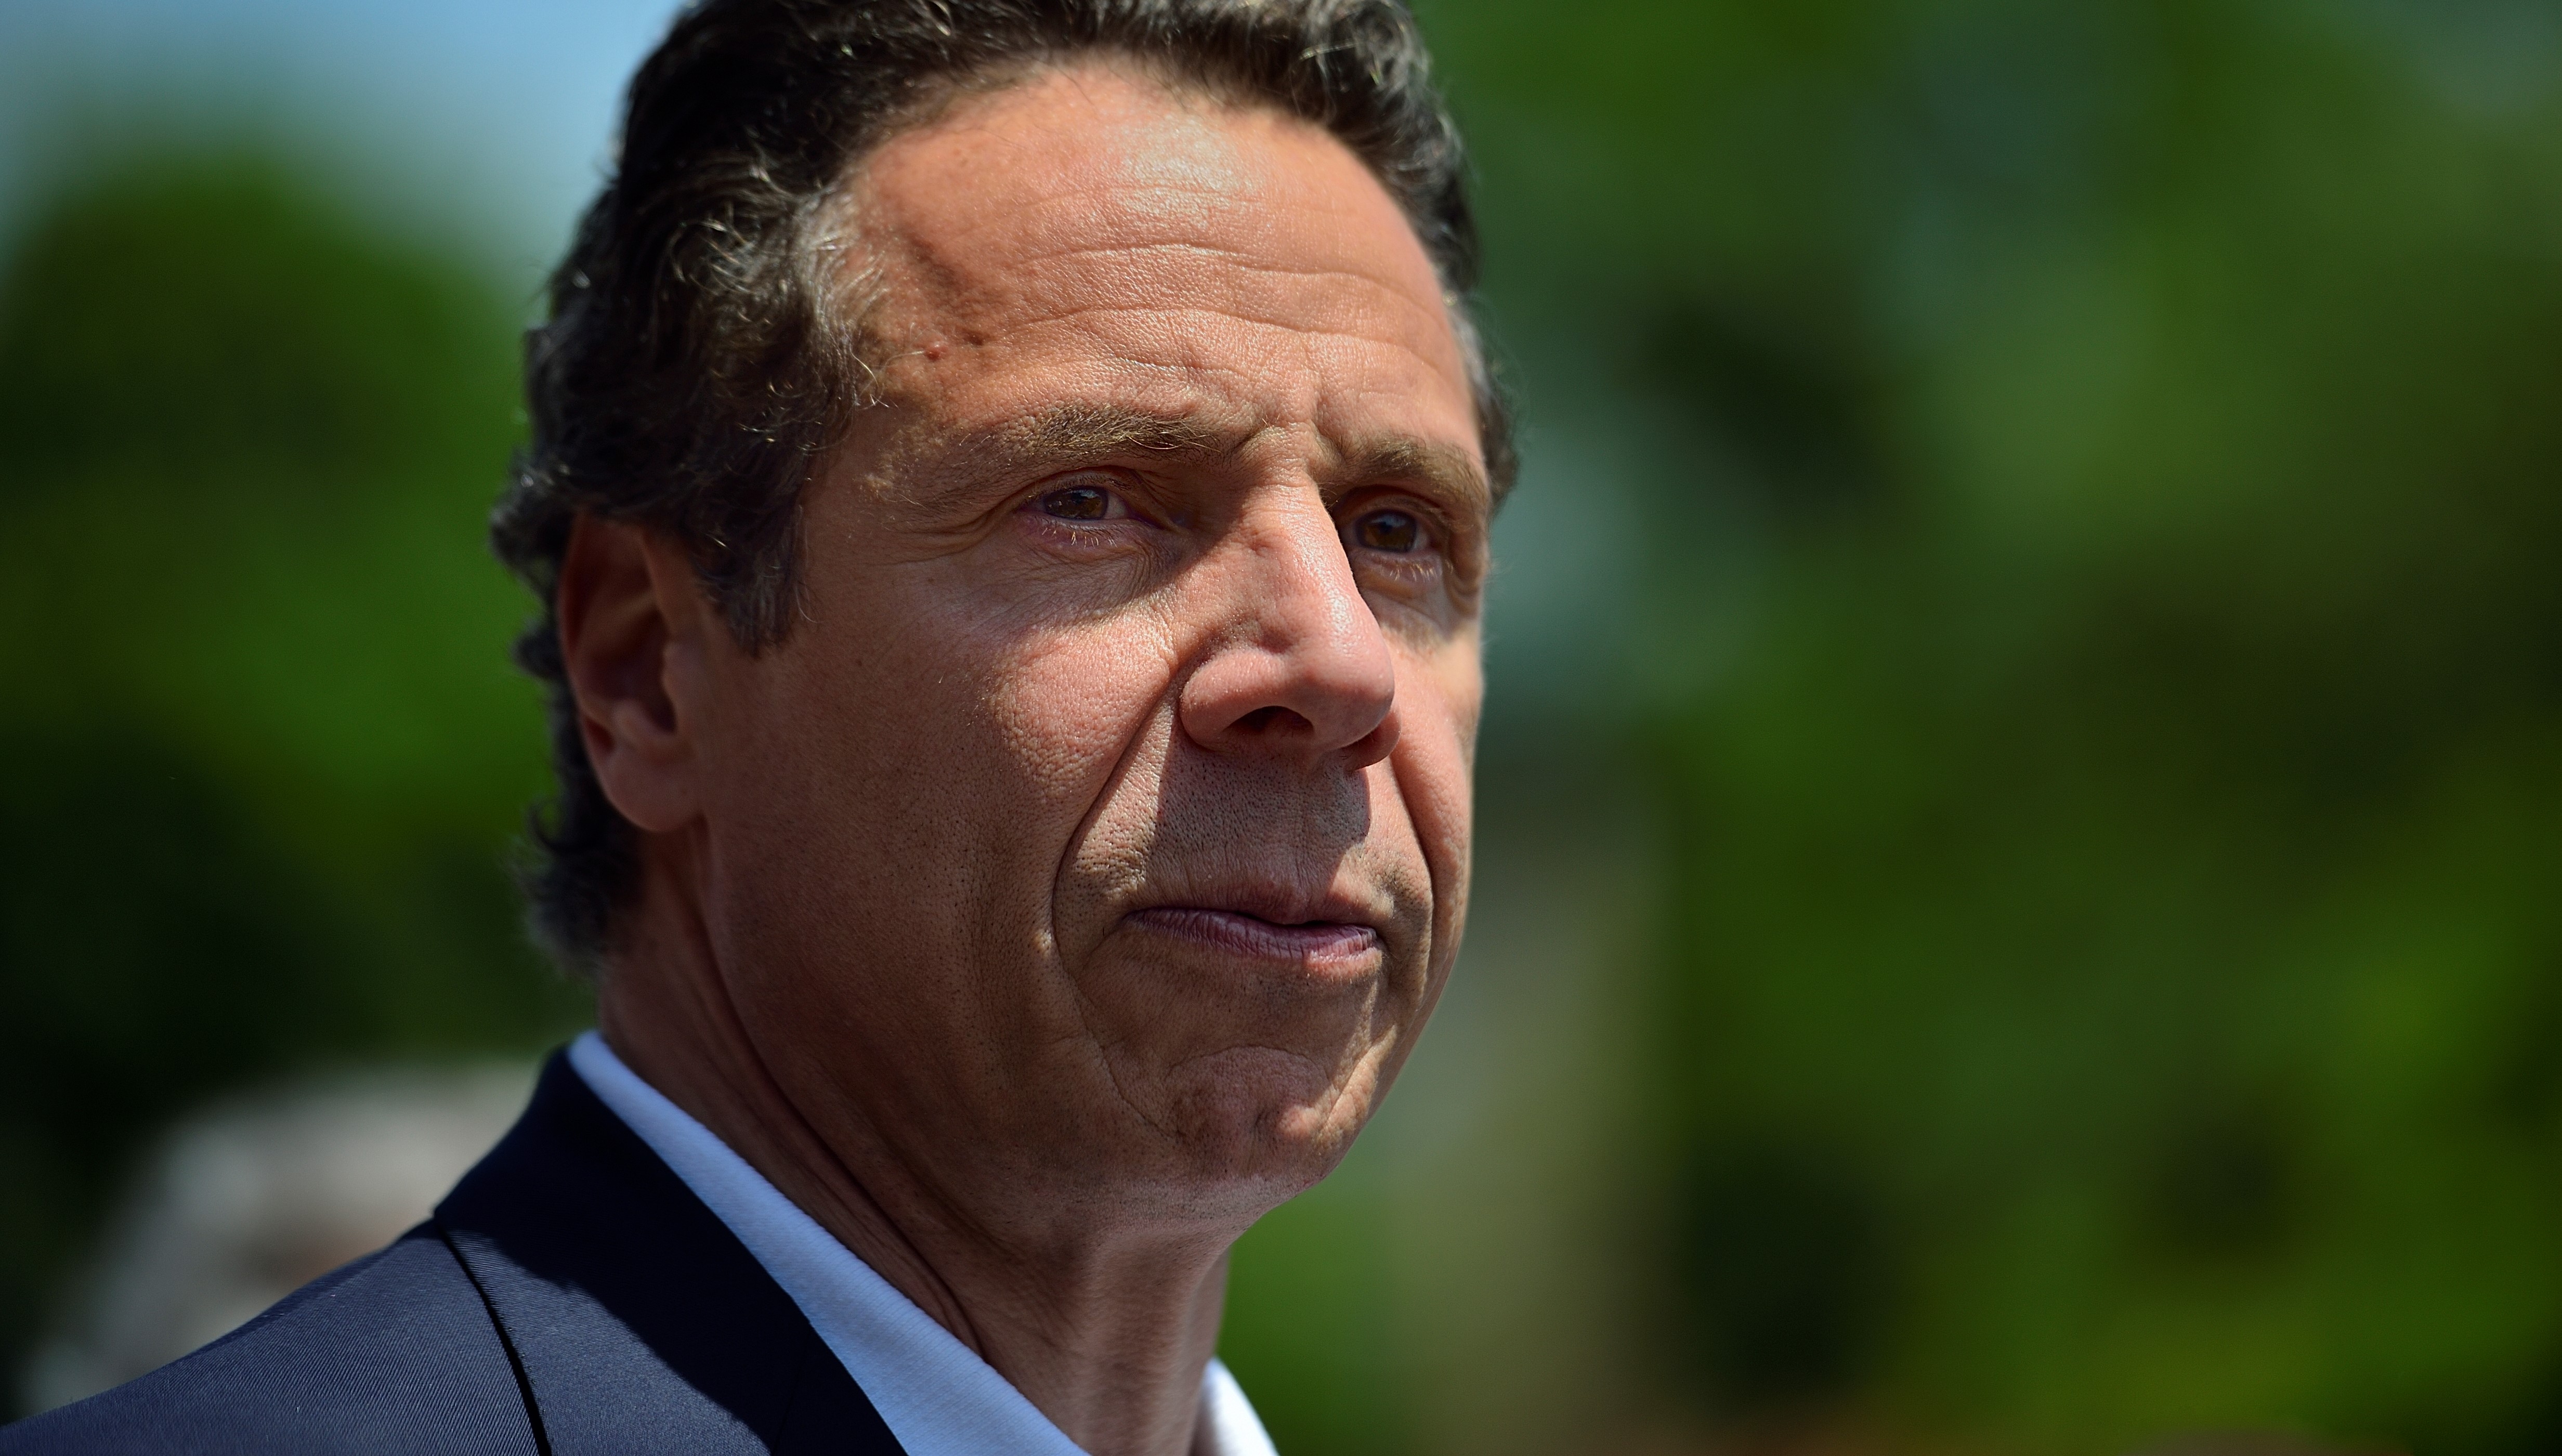 New York governor signs paid sick leave bill amid COVID-19 outbreak